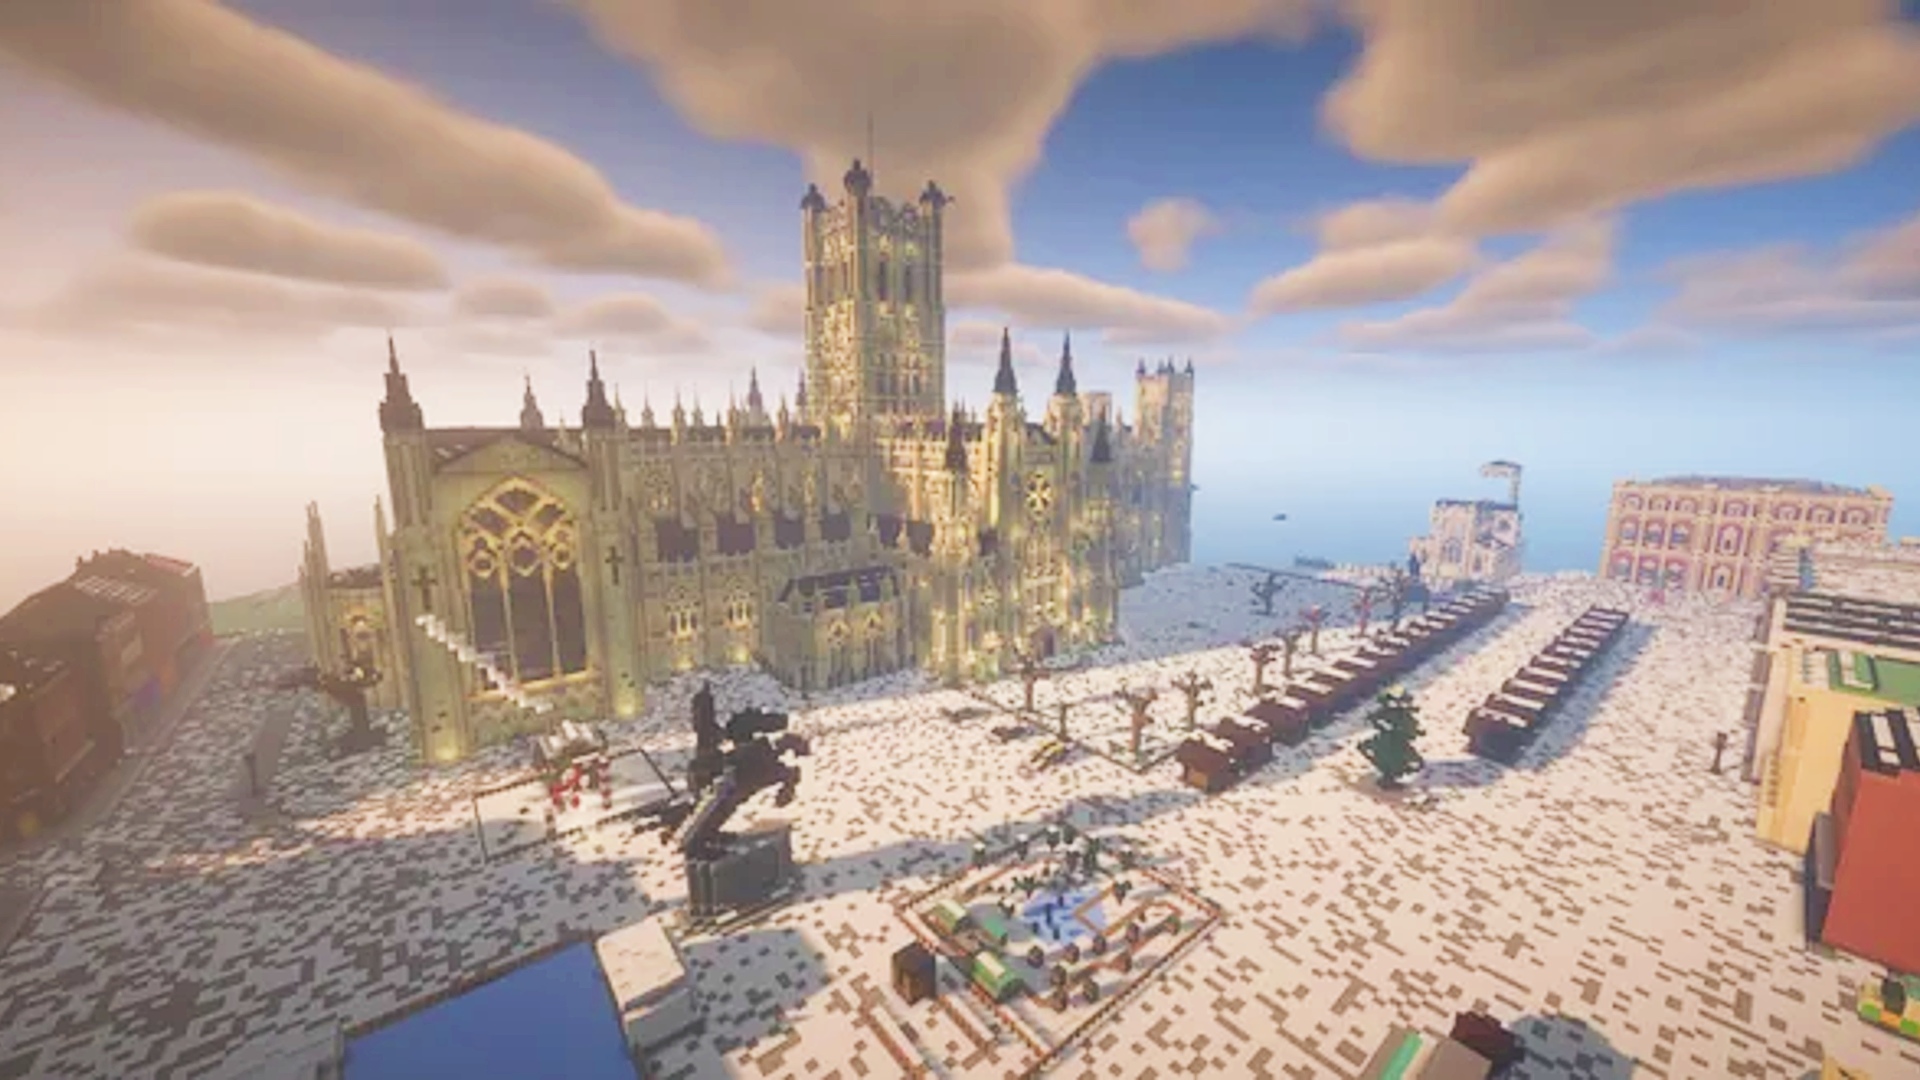 Minecrafter creates snow-capped British cathedral for Christmas